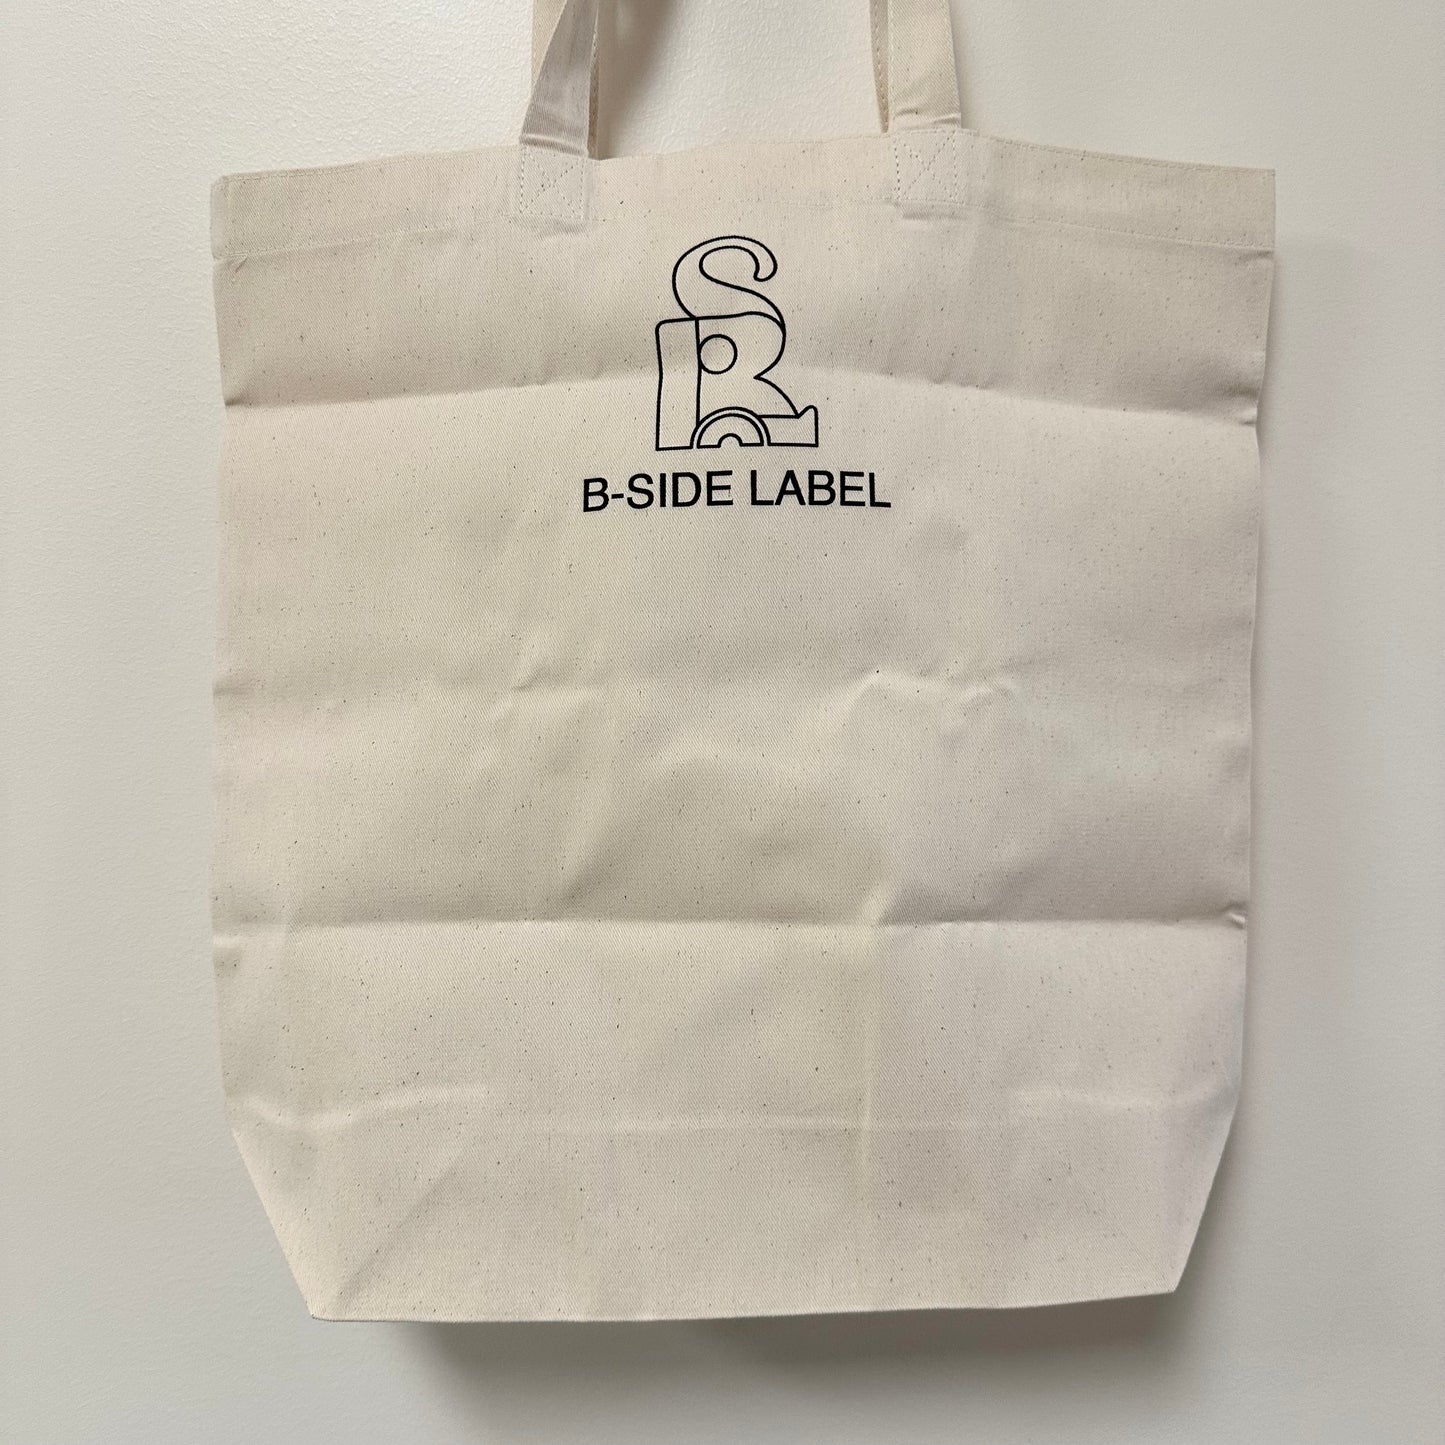 Back side of tote bag that has the logo for B-Side Label.